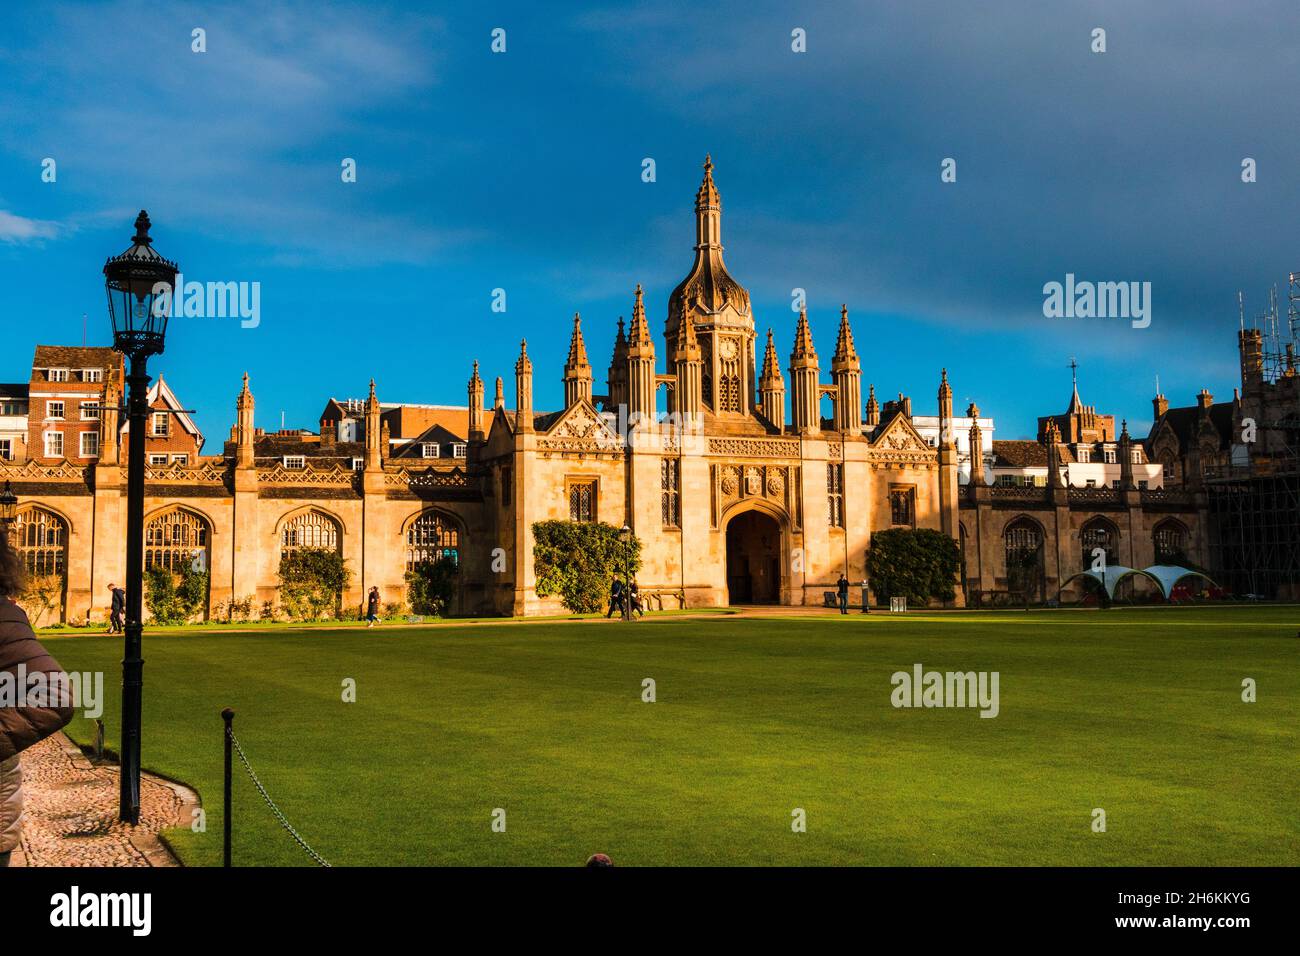 Kings College Cambridge entrance gate house buildings looking from inside the grounds across Front Court Stock Photo